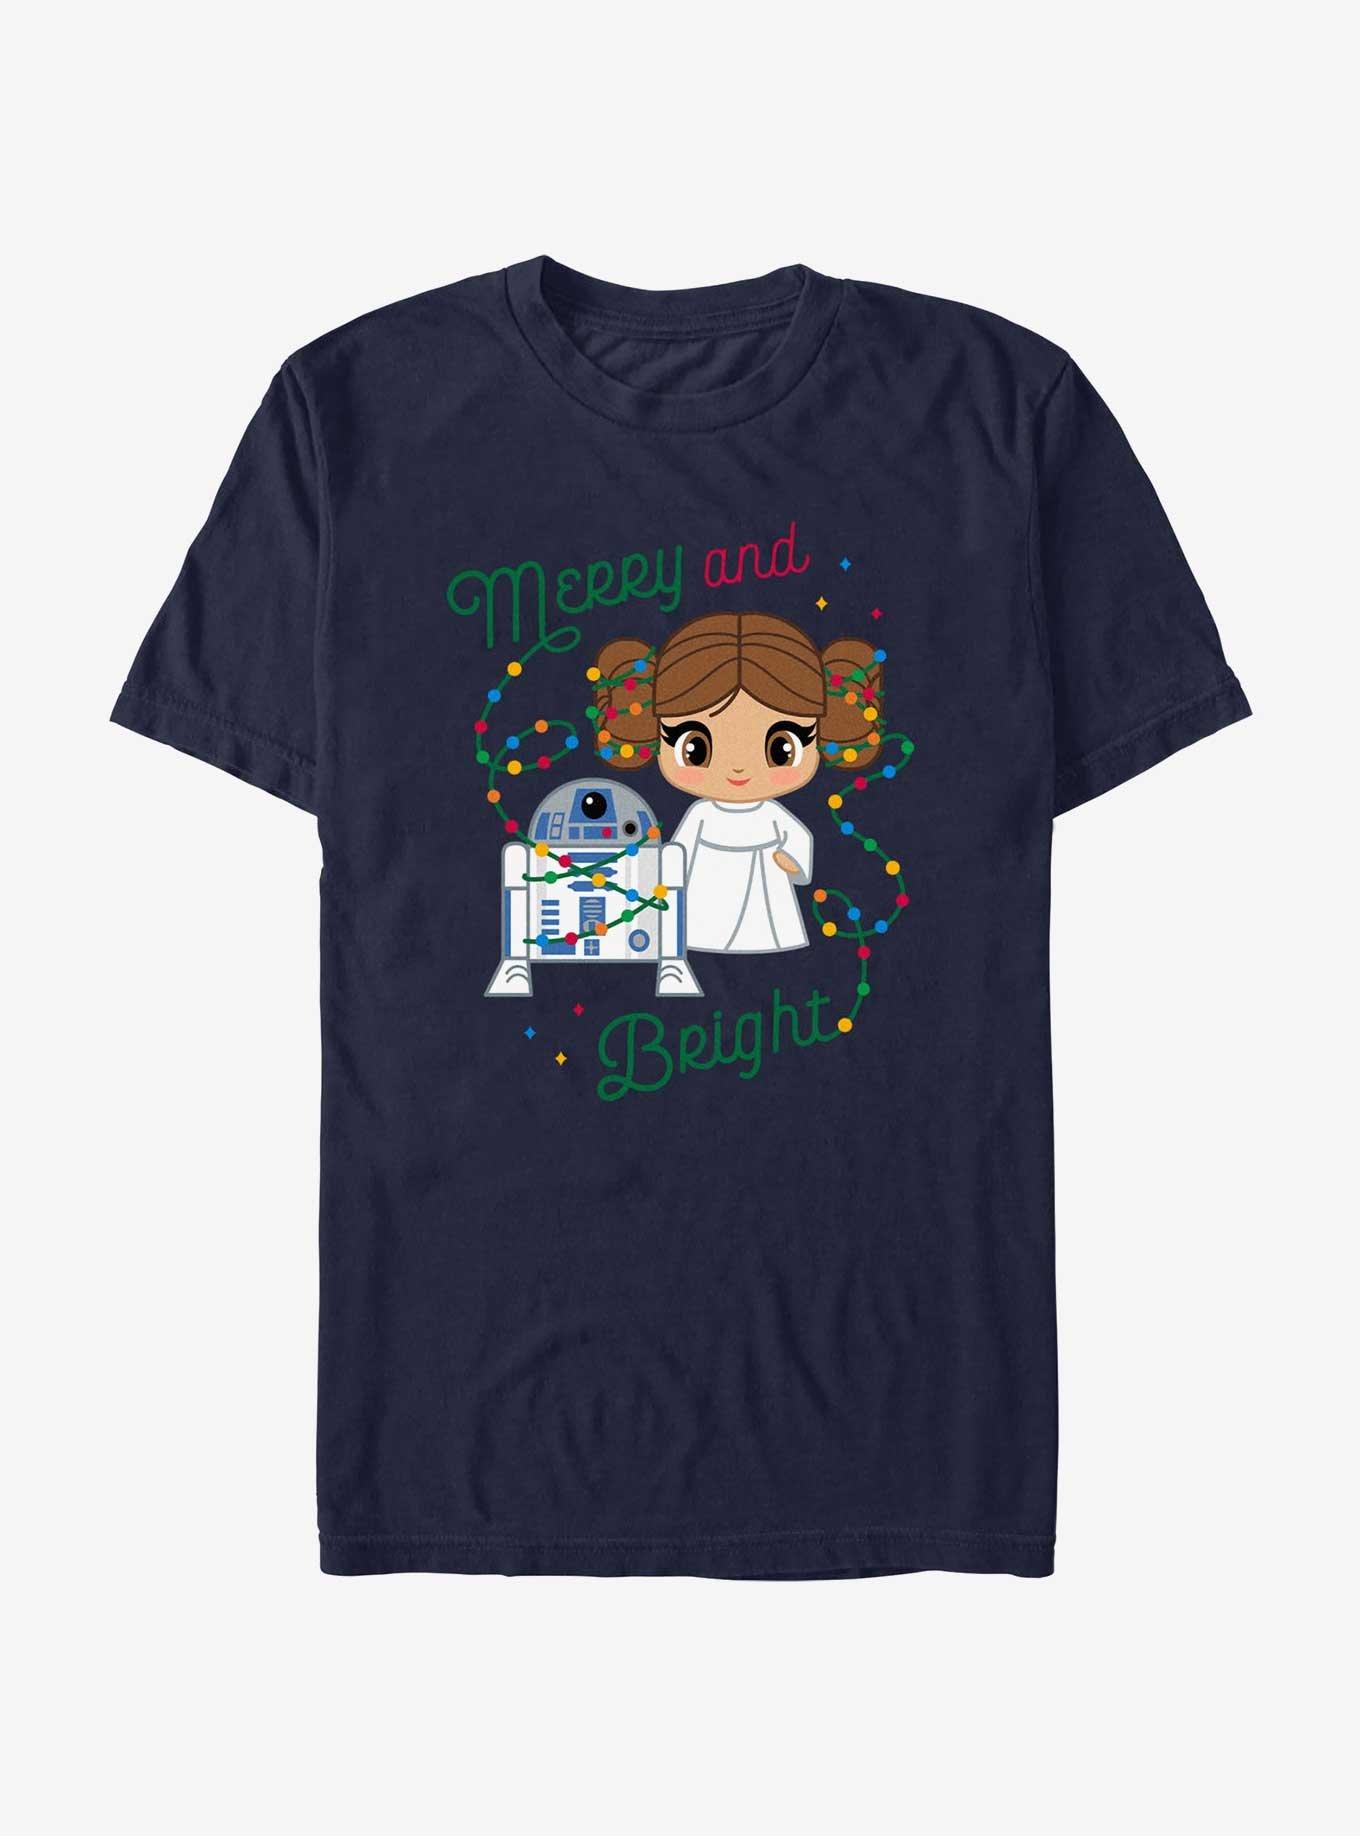 Star Wars R2-D2 & Leia Merry and Bright T-Shirt, NAVY, hi-res